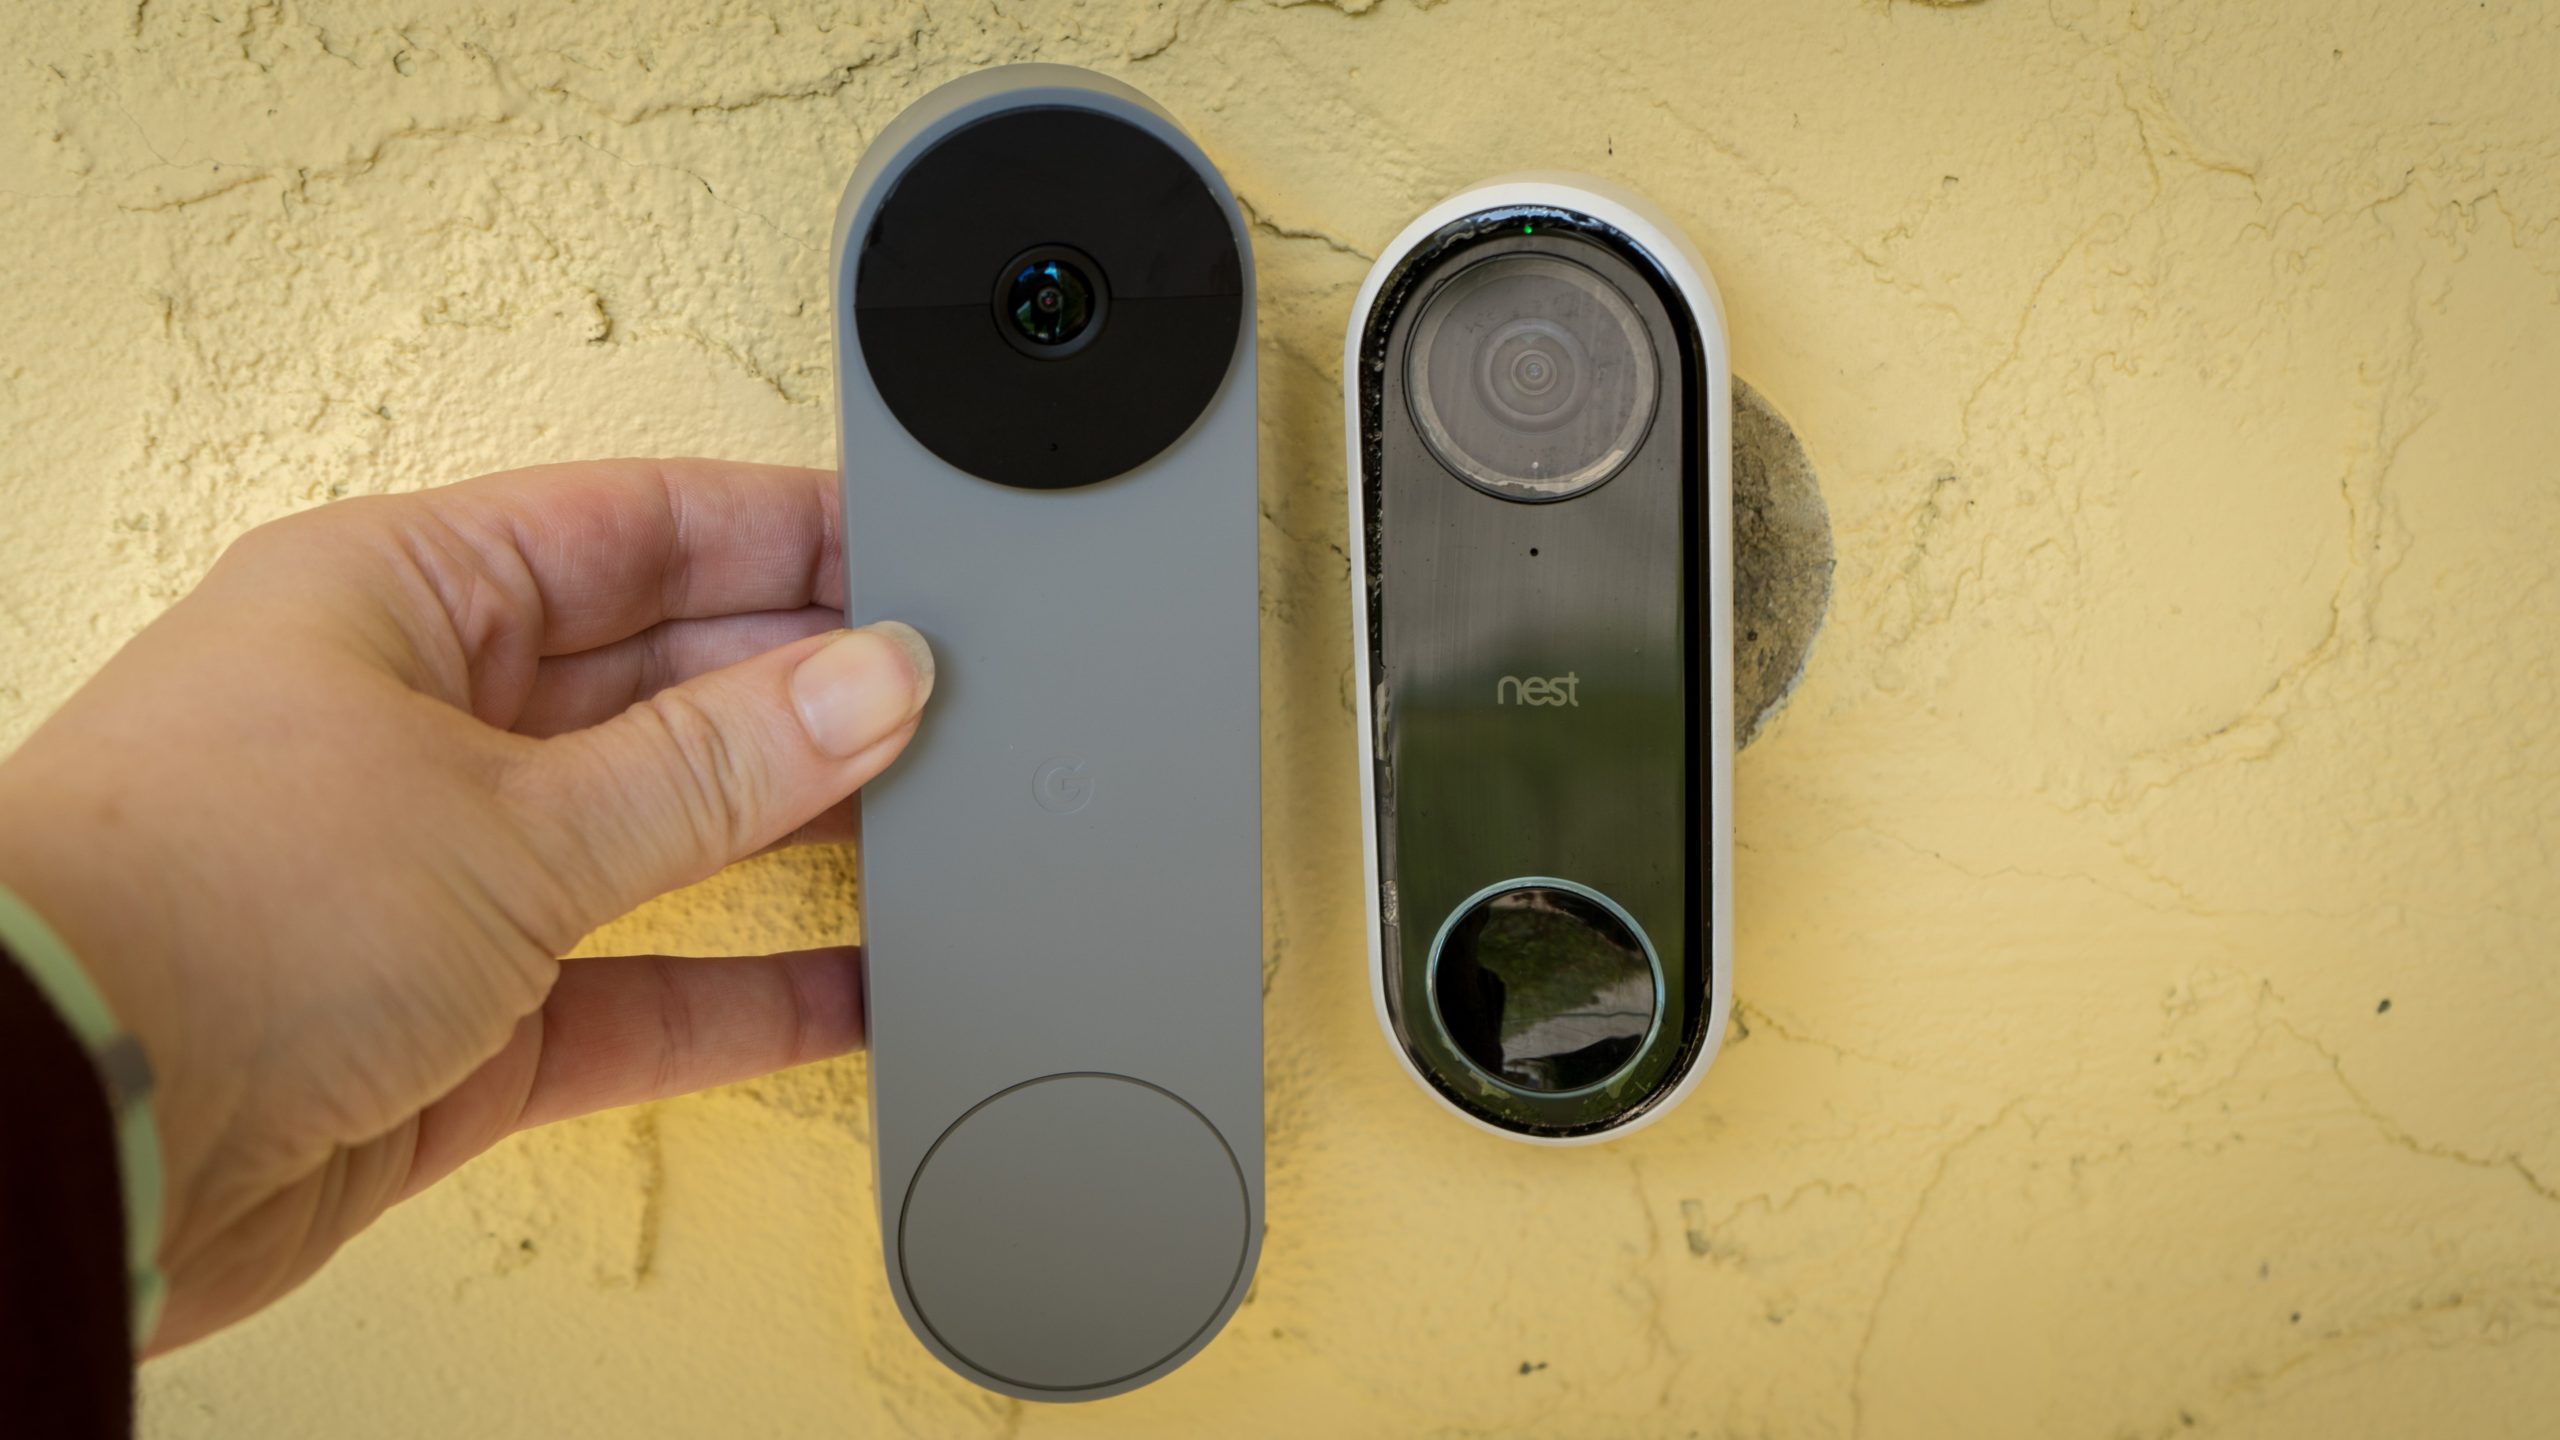 The second-gen Nest Doorbell camera is significantly larger than the first-generation Nest Doorbell camera. (Photo: Florence Ion / Gizmodo)